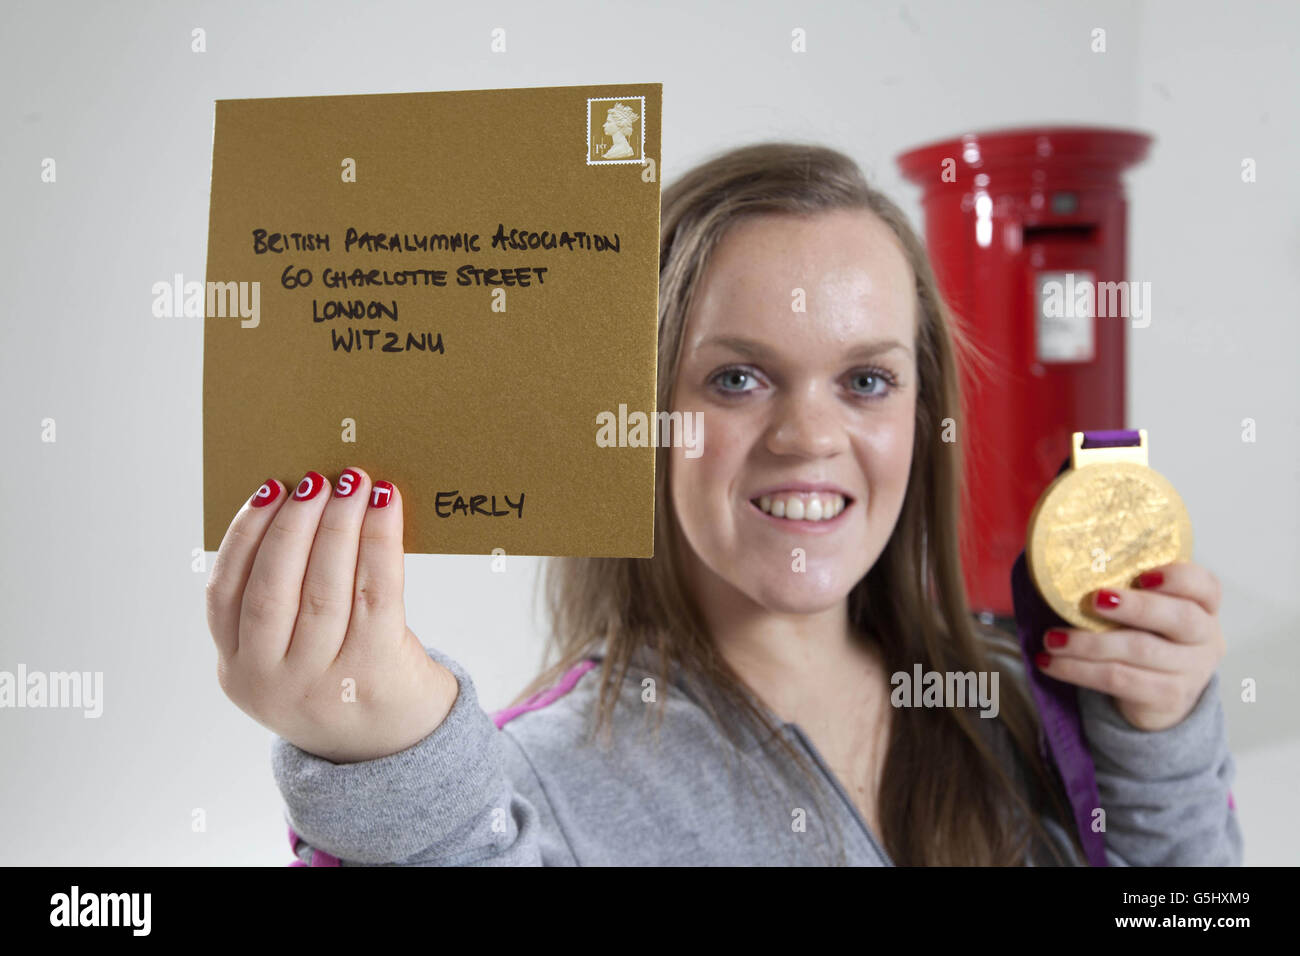 British Paralympian Ellie Simmonds launches the Royal Mail Post Early campaign in London to encourage consumers to send their Christmas cards early. Stock Photo